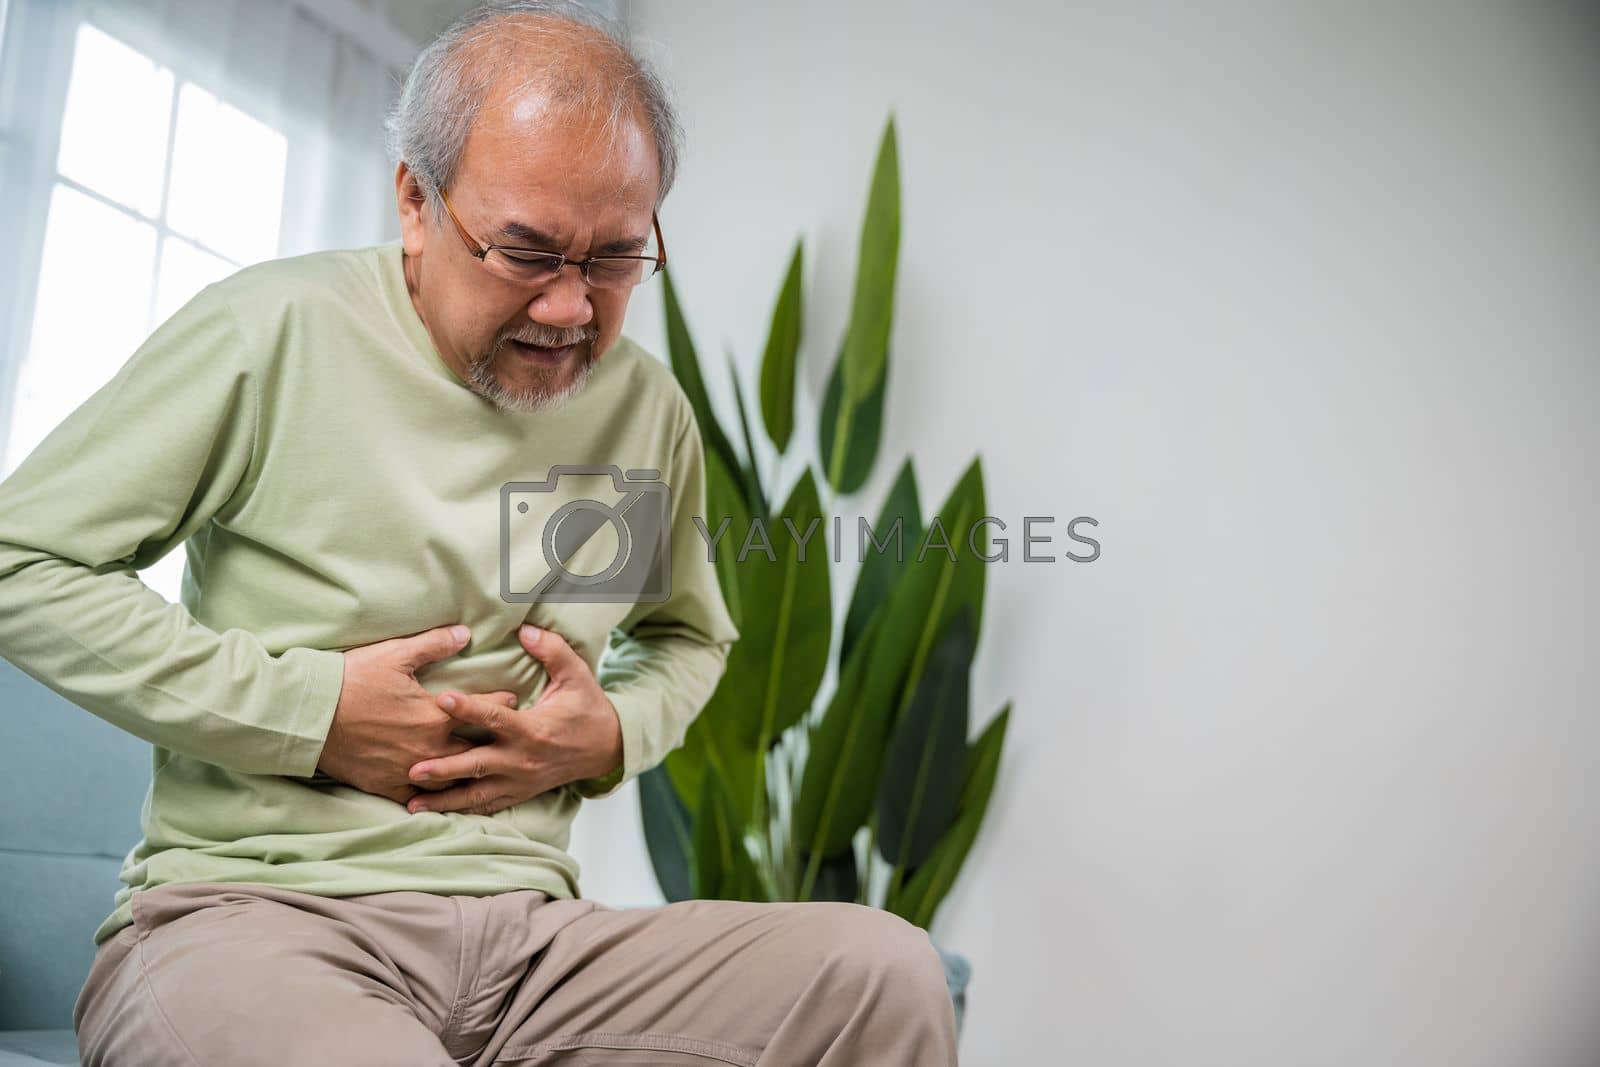 Royalty free image of Senior Asian man sitting on sofa having suffering from stomach ache holding his stomach pain by Sorapop